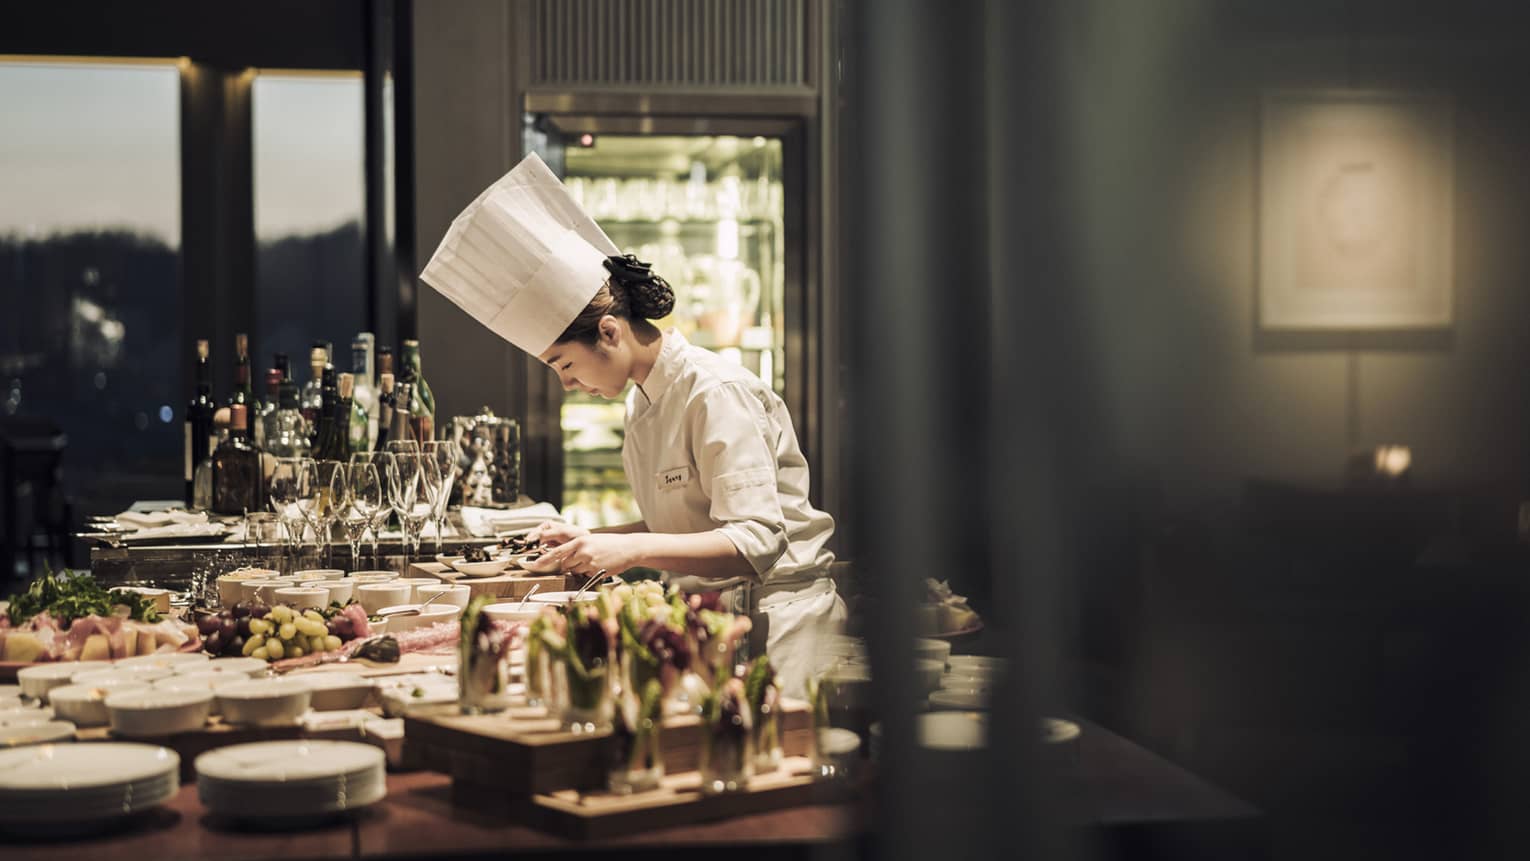 Chef wearing white uniform, hat stands garnishes appetizers on counter covered with dishes, meals